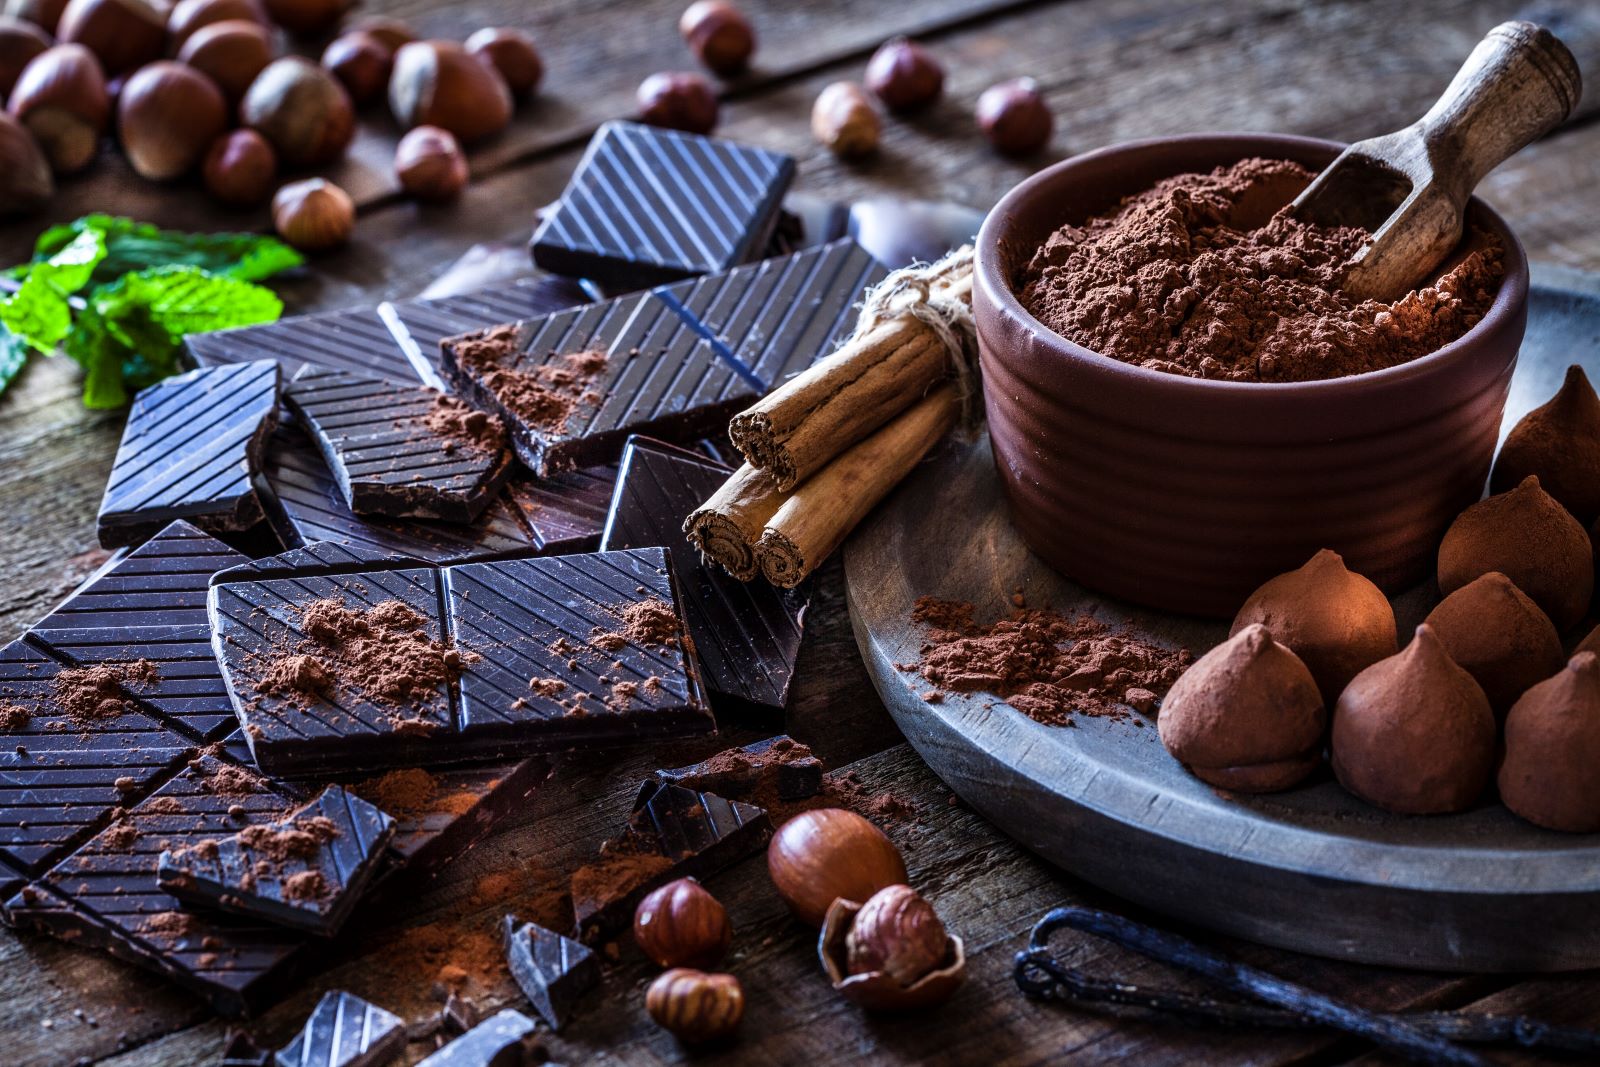 Consumer reports recently found alarming amounts of lead and cadmium in dark chocolate, which could be harmful to the body.